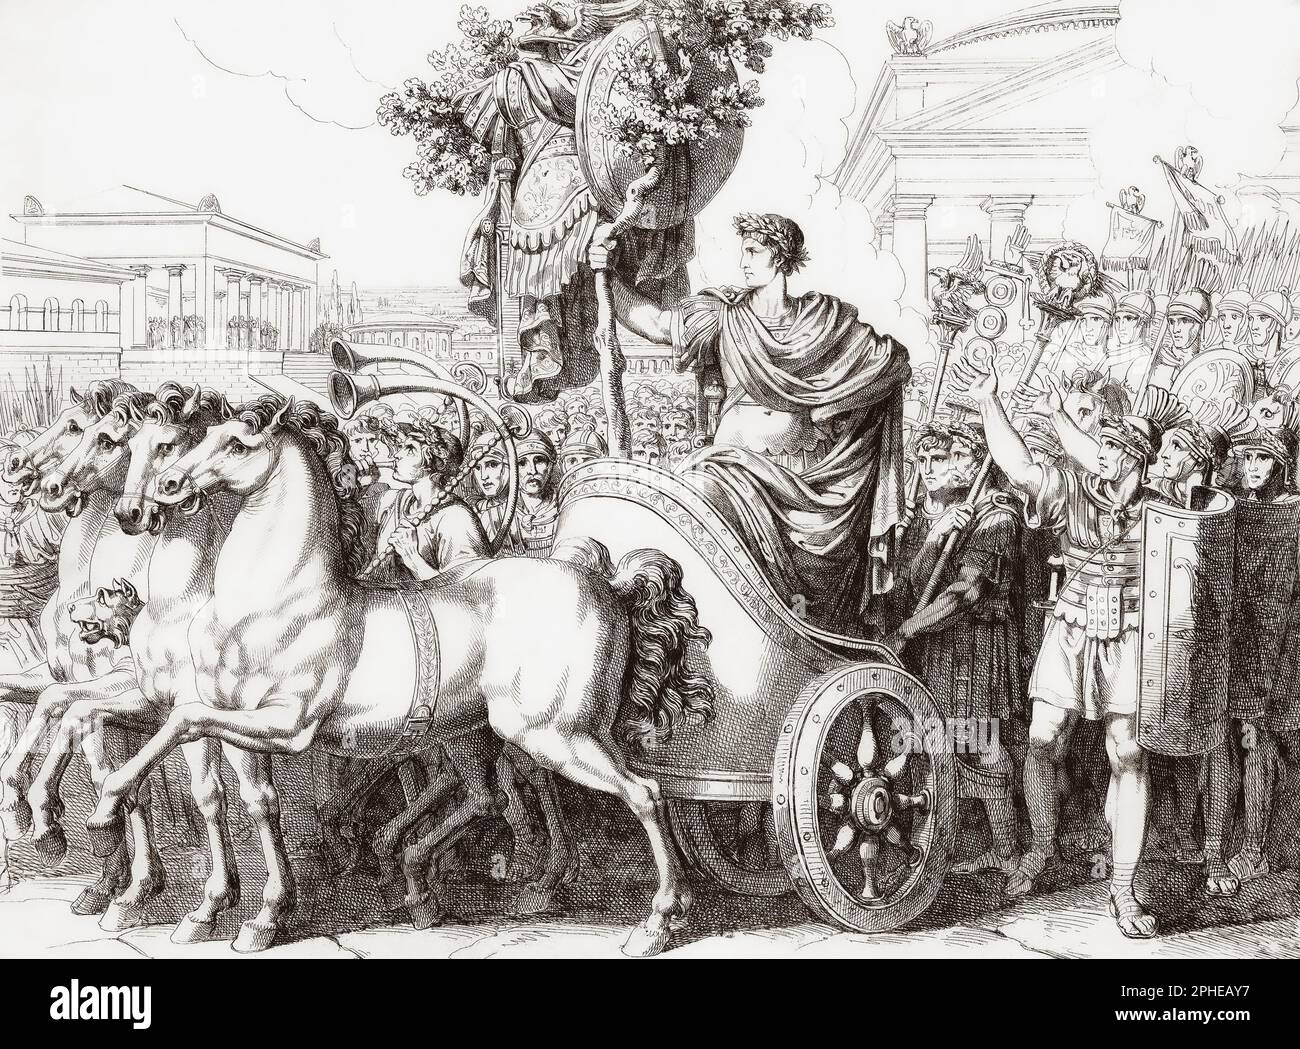 Roman general Marcus Claudius Marcellus, c. 268 – 208 BC, enjoys his triumph parade in Rome after killing the Gallic military leader and king Viridomarus in hand-to-hand combat during the Battle of Clastidium, 222 BC.  On his way to the temple of Jupiter Feretrius he carries the spolia opima, the armour, arms, and other effects that an ancient Roman general stripped from the body of an opposing commander slain in single combat.  After a 19th century work by Bartolomeo Pinelli. Stock Photo